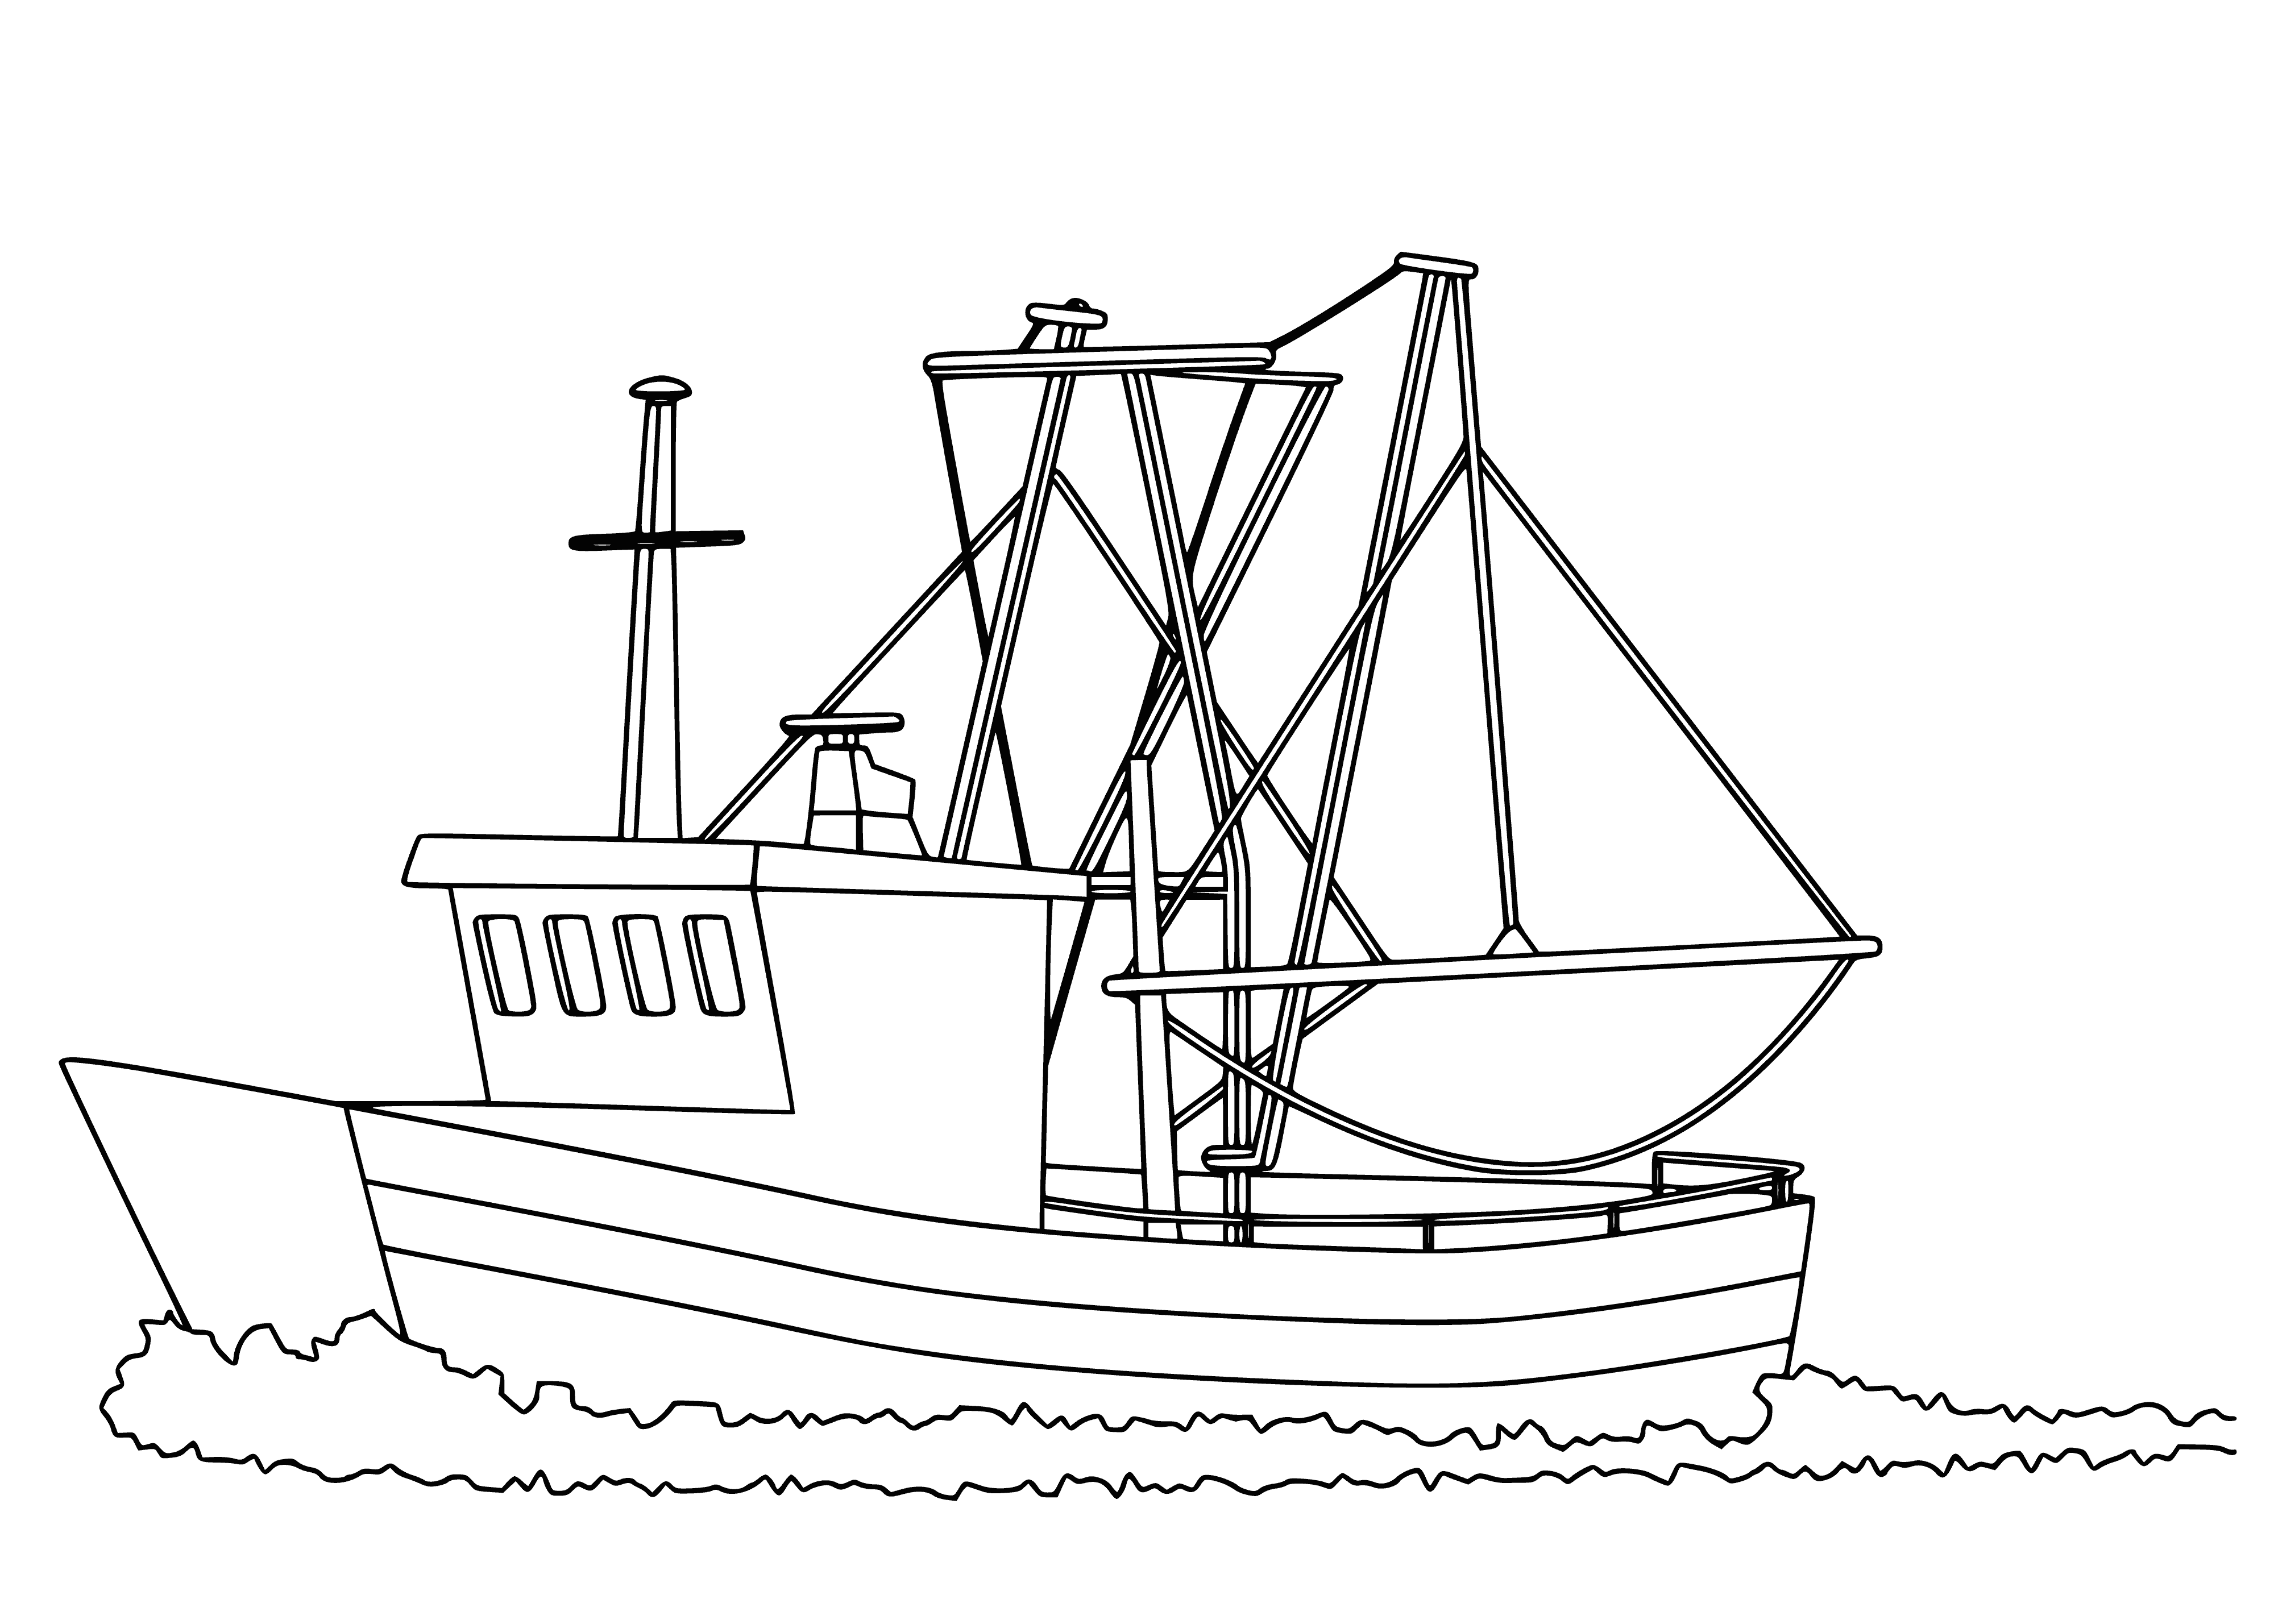 coloring page: Man in a fishing boat in a river, surrounded by trees. He's got a rod and a hat. The river is flowing. #Nature